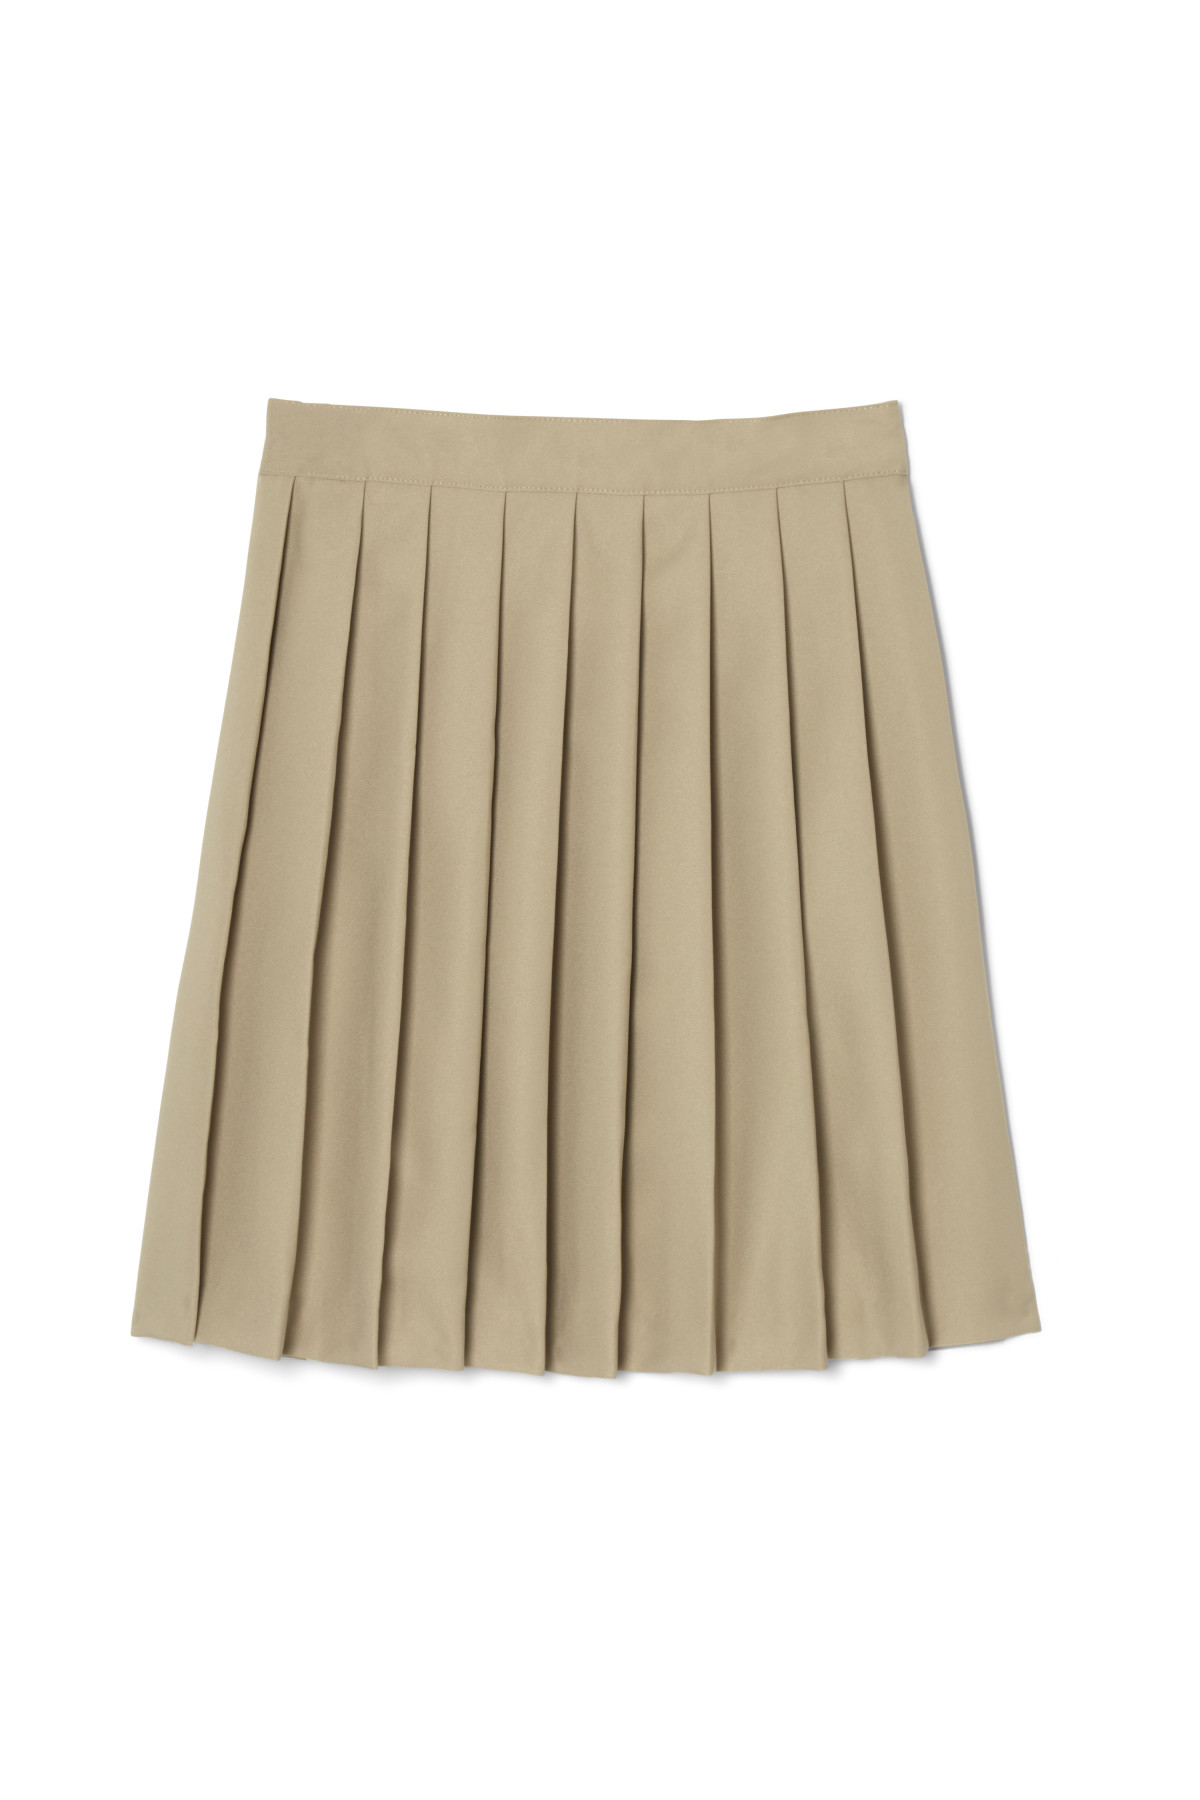 French Toast Girls' Pleated Skirt 